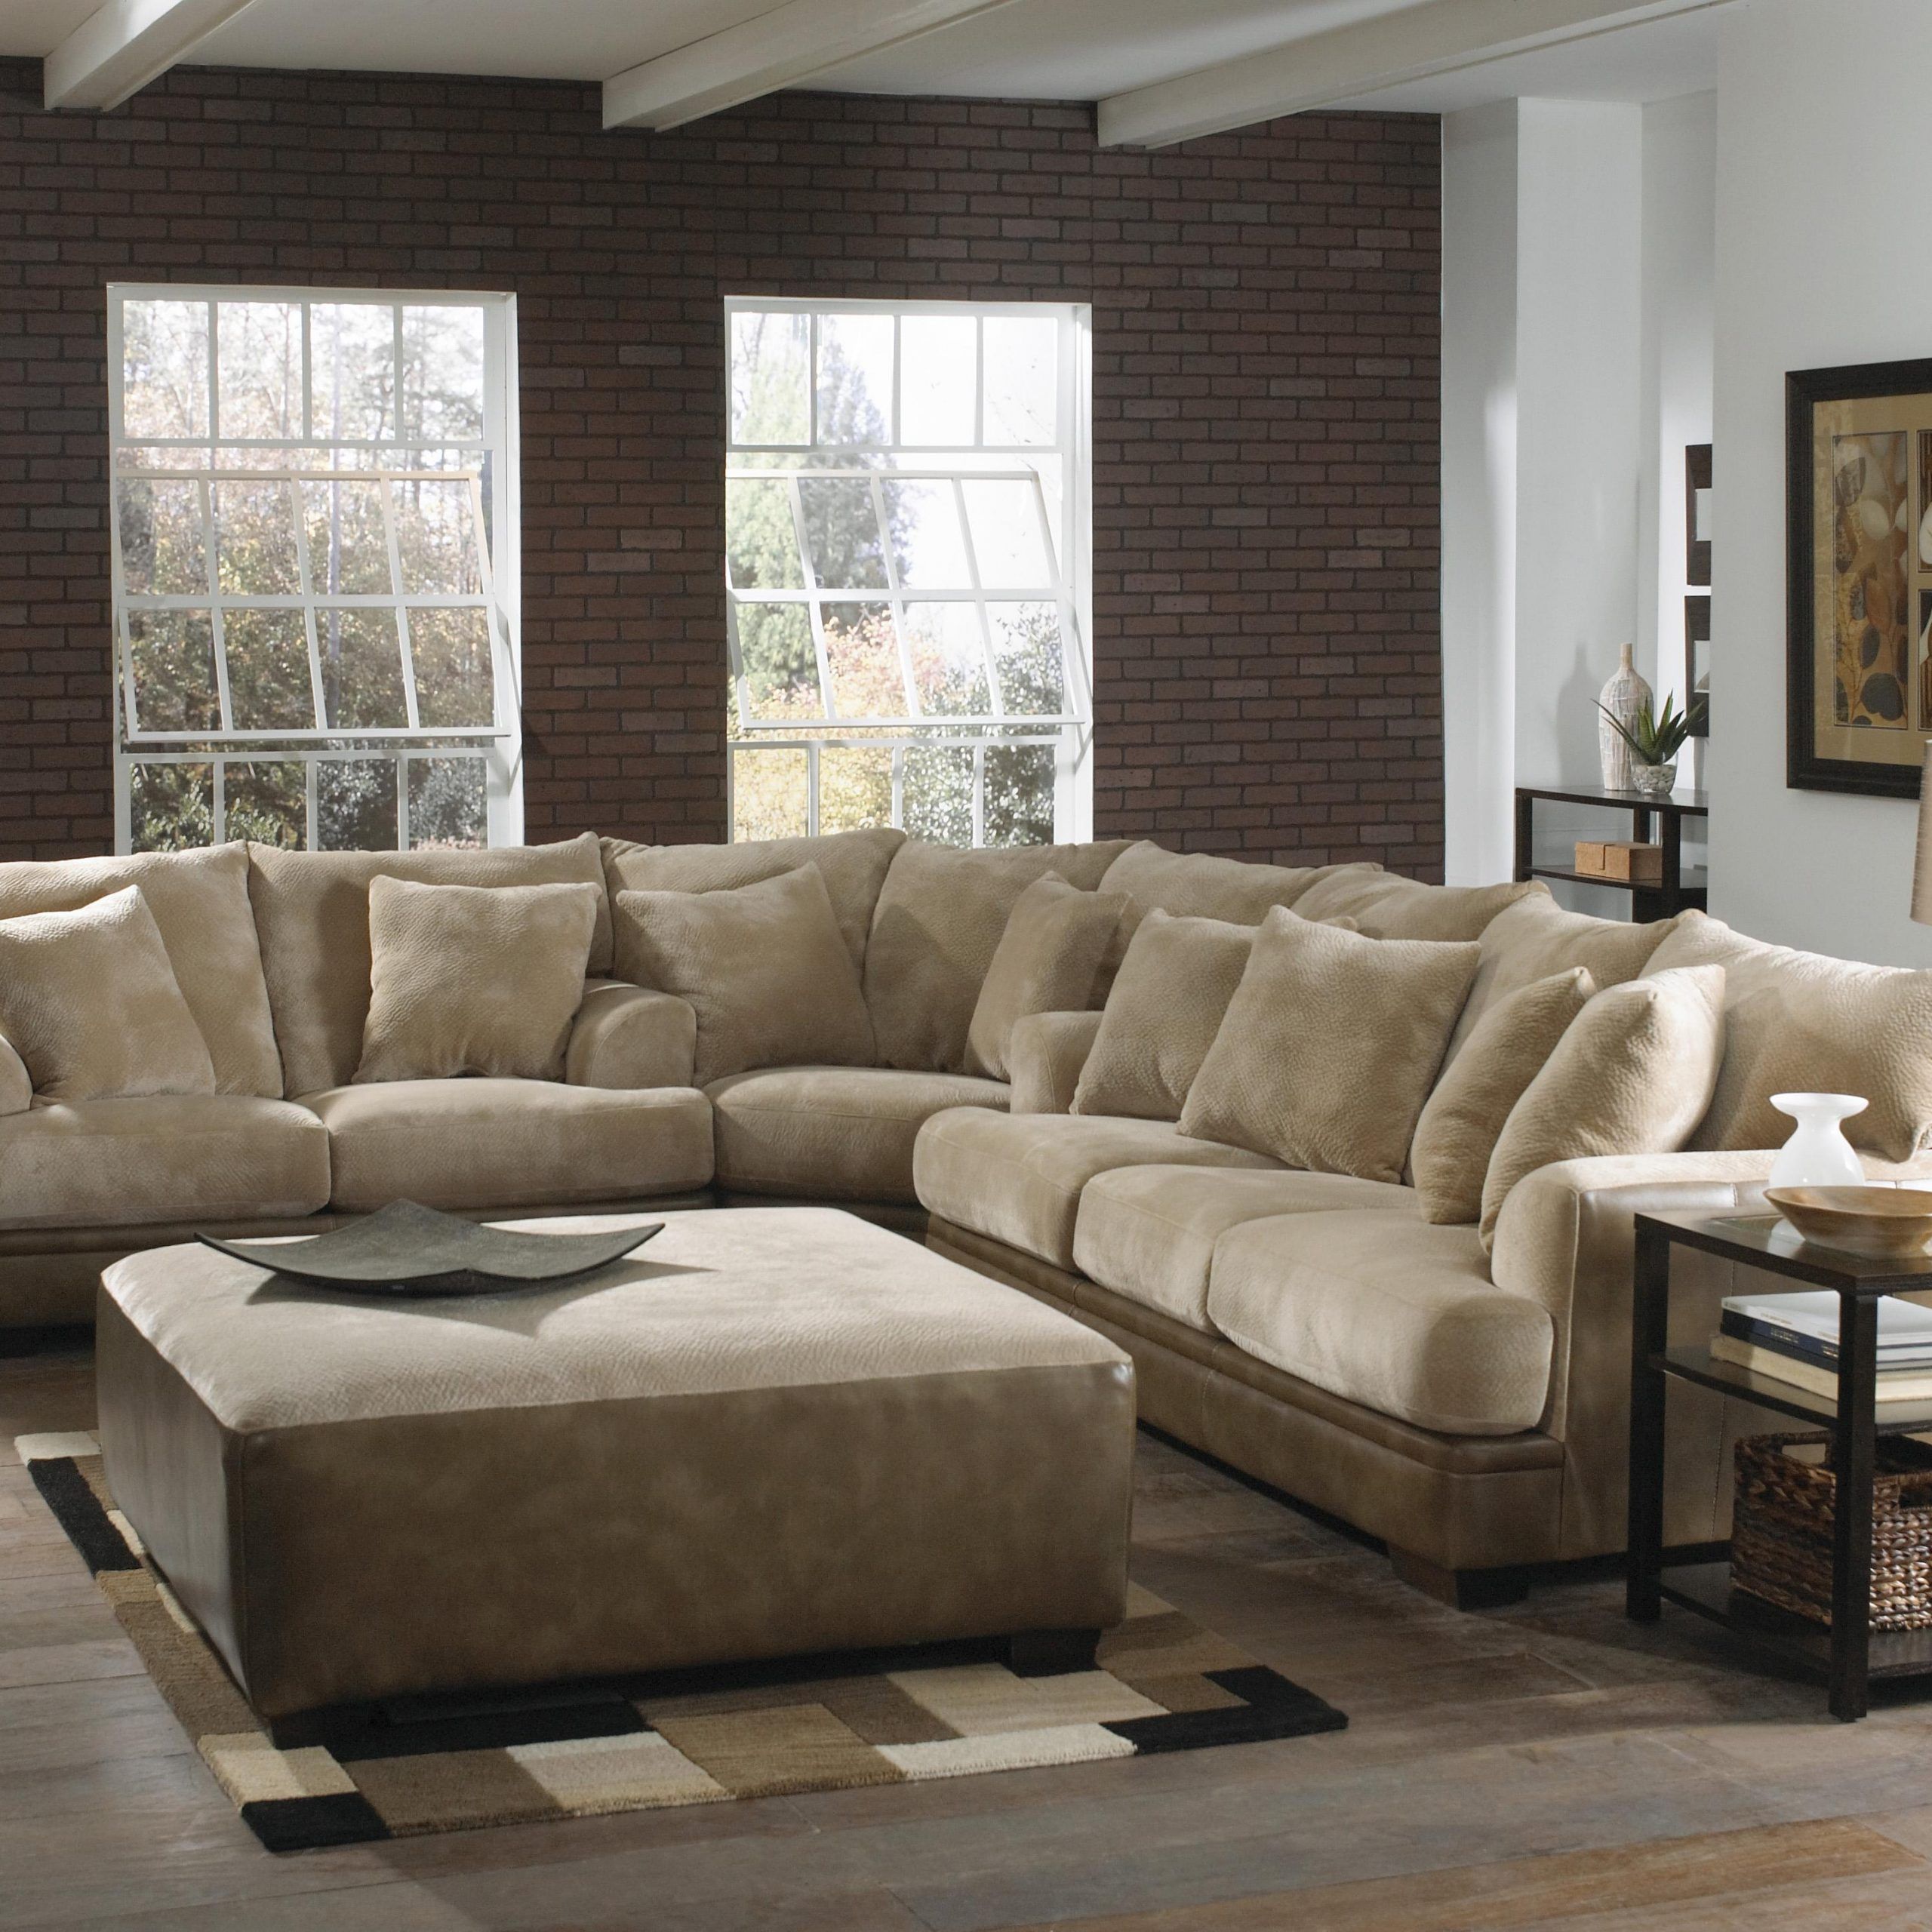 Large L Shaped Sectional Sofa With Left Side Loveseat Within Hannah Left Sectional Sofas (View 8 of 15)